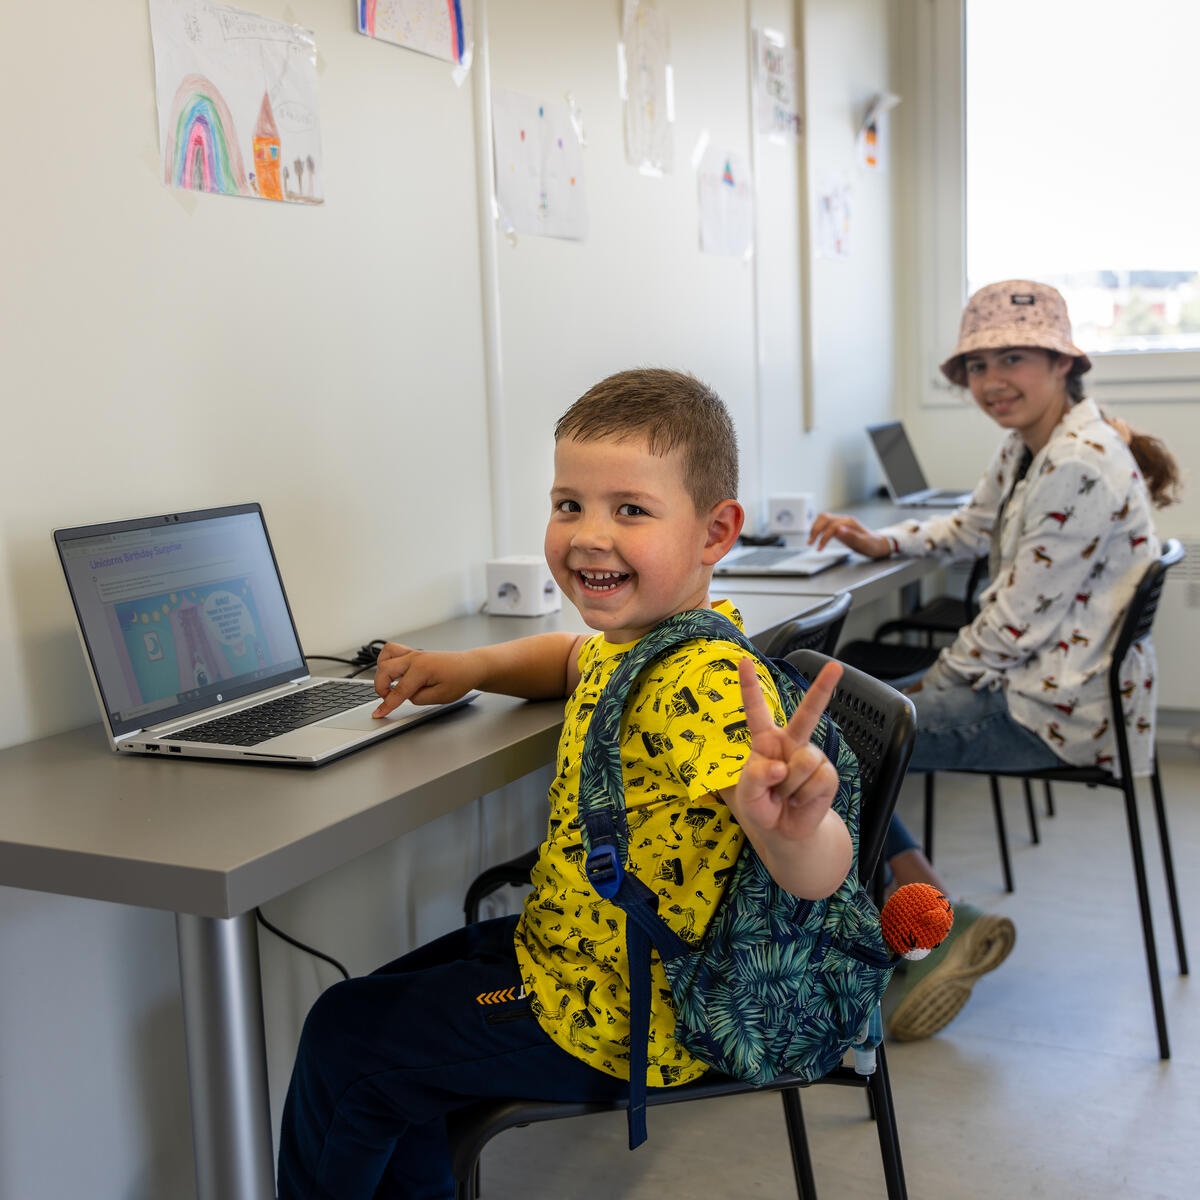 4-year-old Ukaranian Child, Kiril, is happy to use a computer at the Portable Connectivity Center established by World Vision